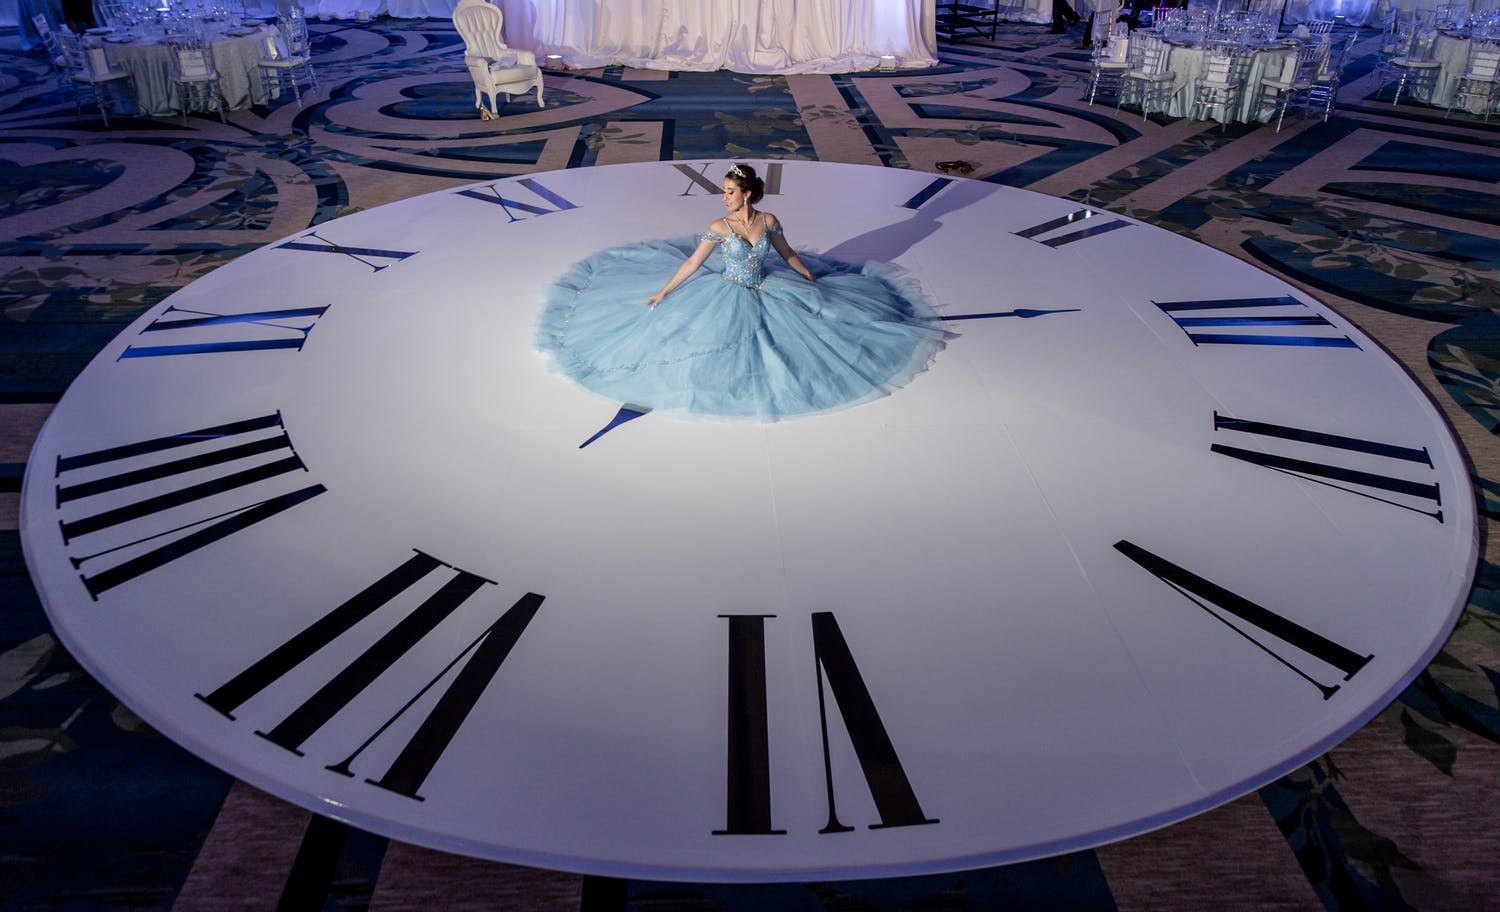 Quinceañera sits in blue ball gown on clock-shaped dance floor | PartySlate